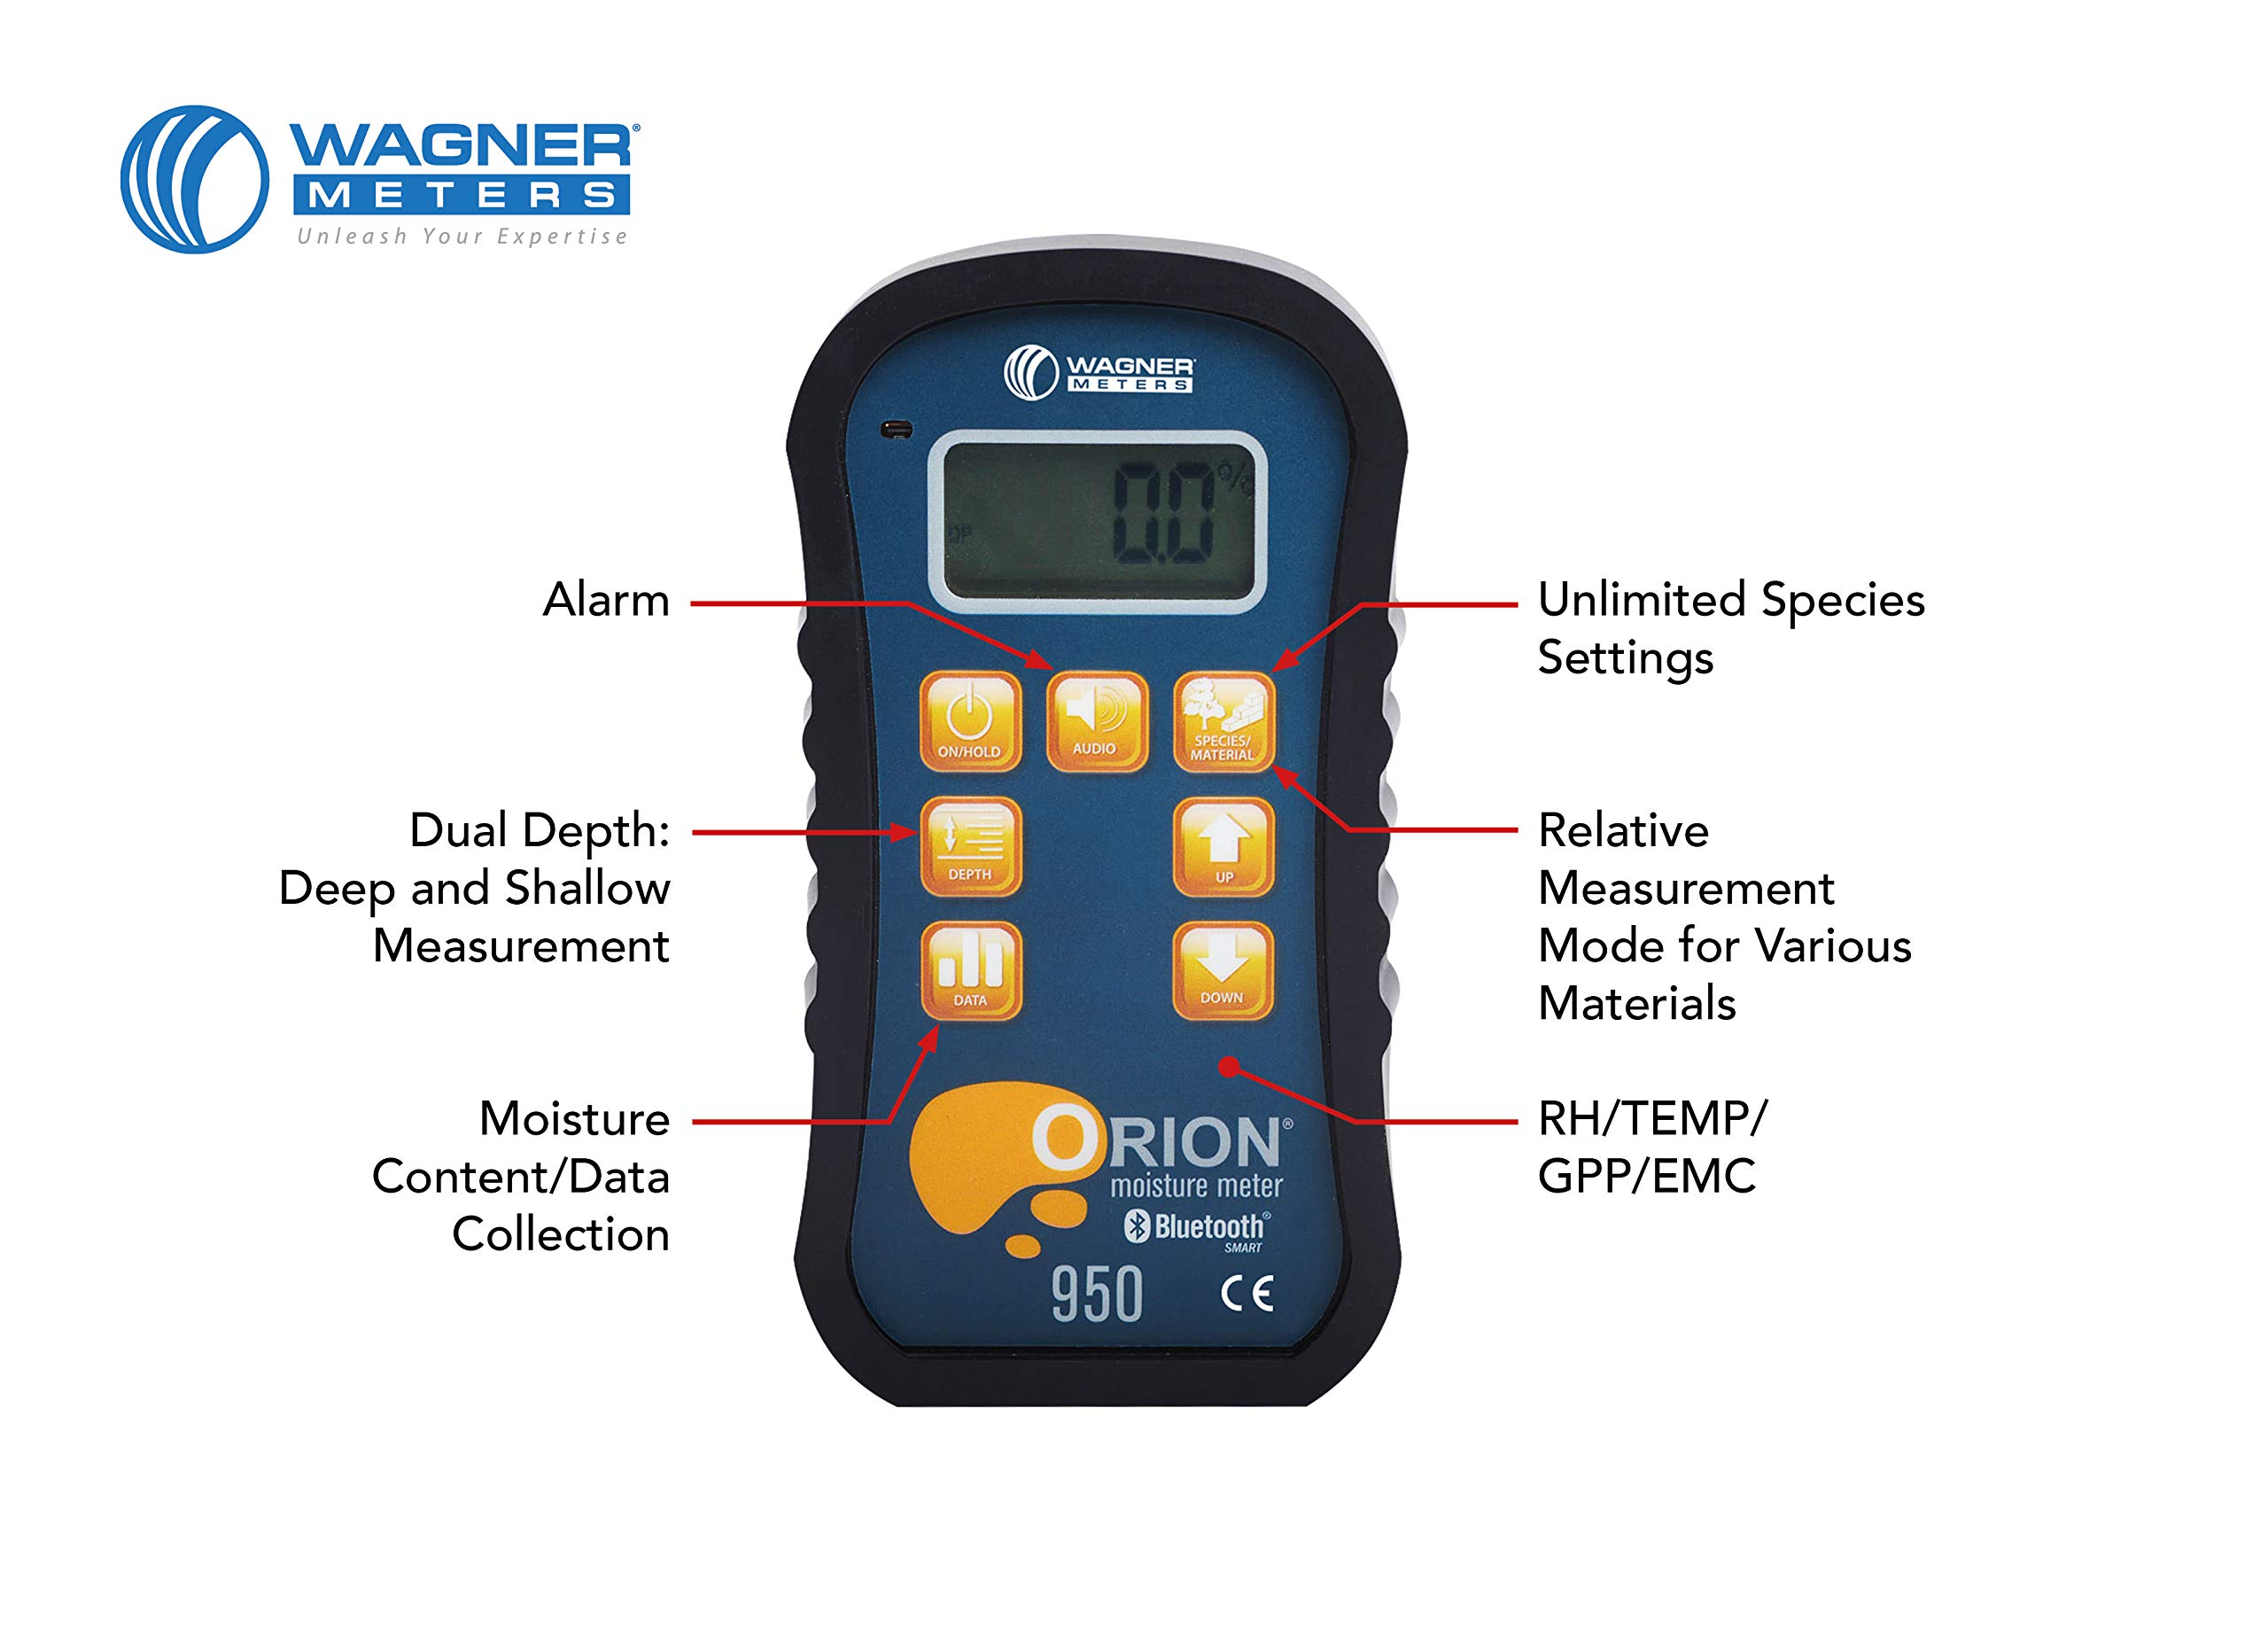 Wagner’s Orion® Line of Moisture Meters